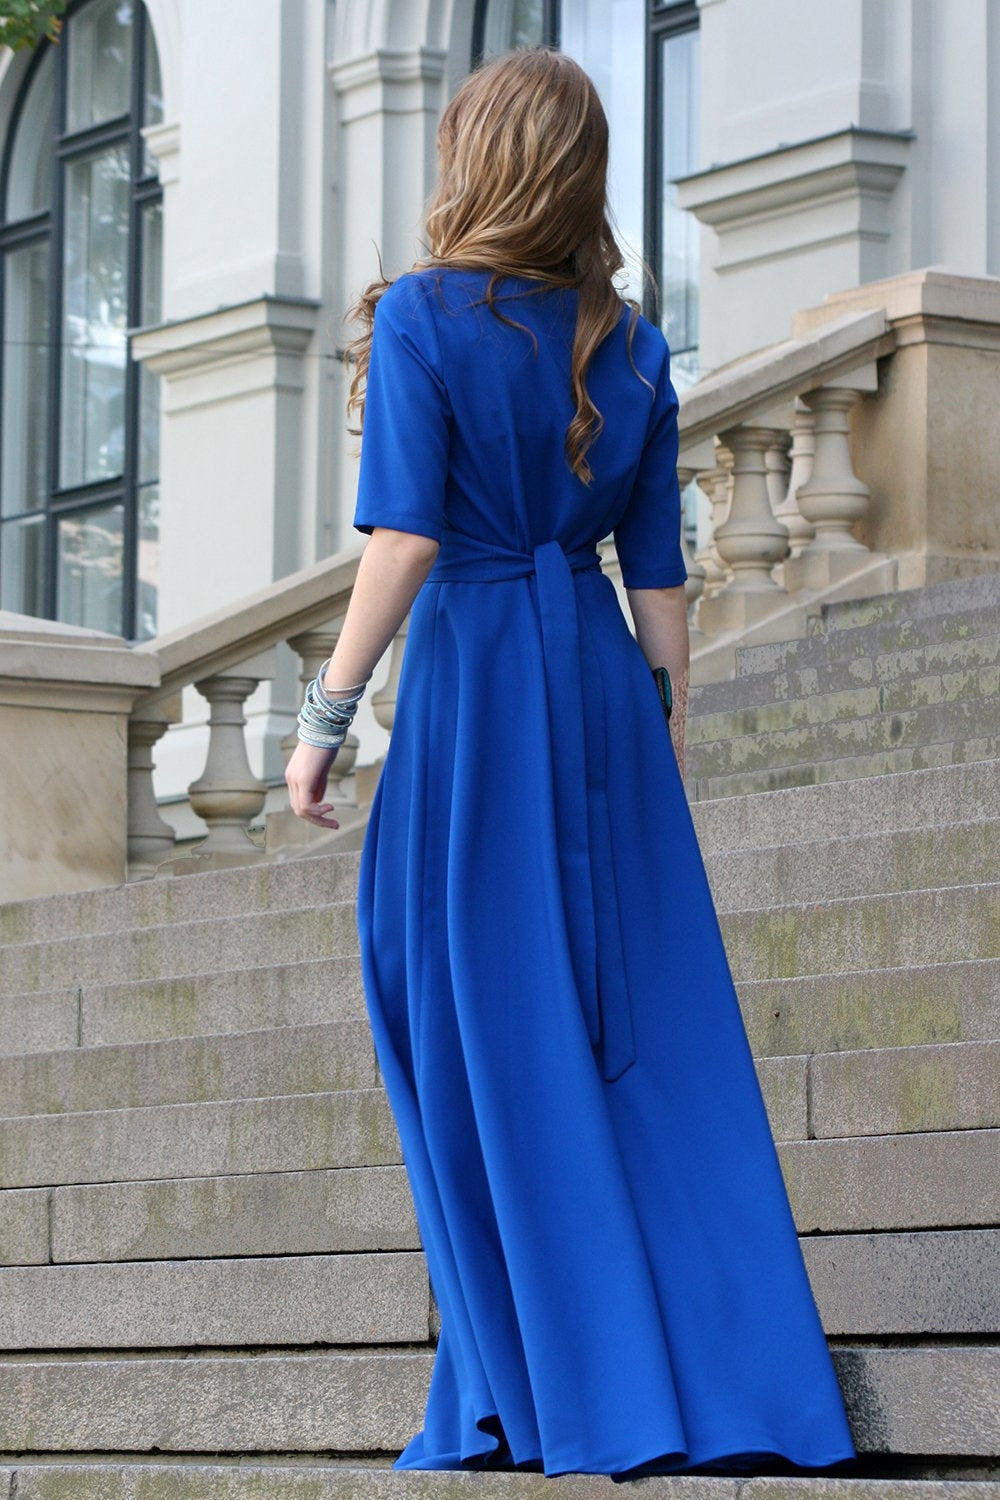 Blue maxi dress with circle skirts. Golden color detail in neckline